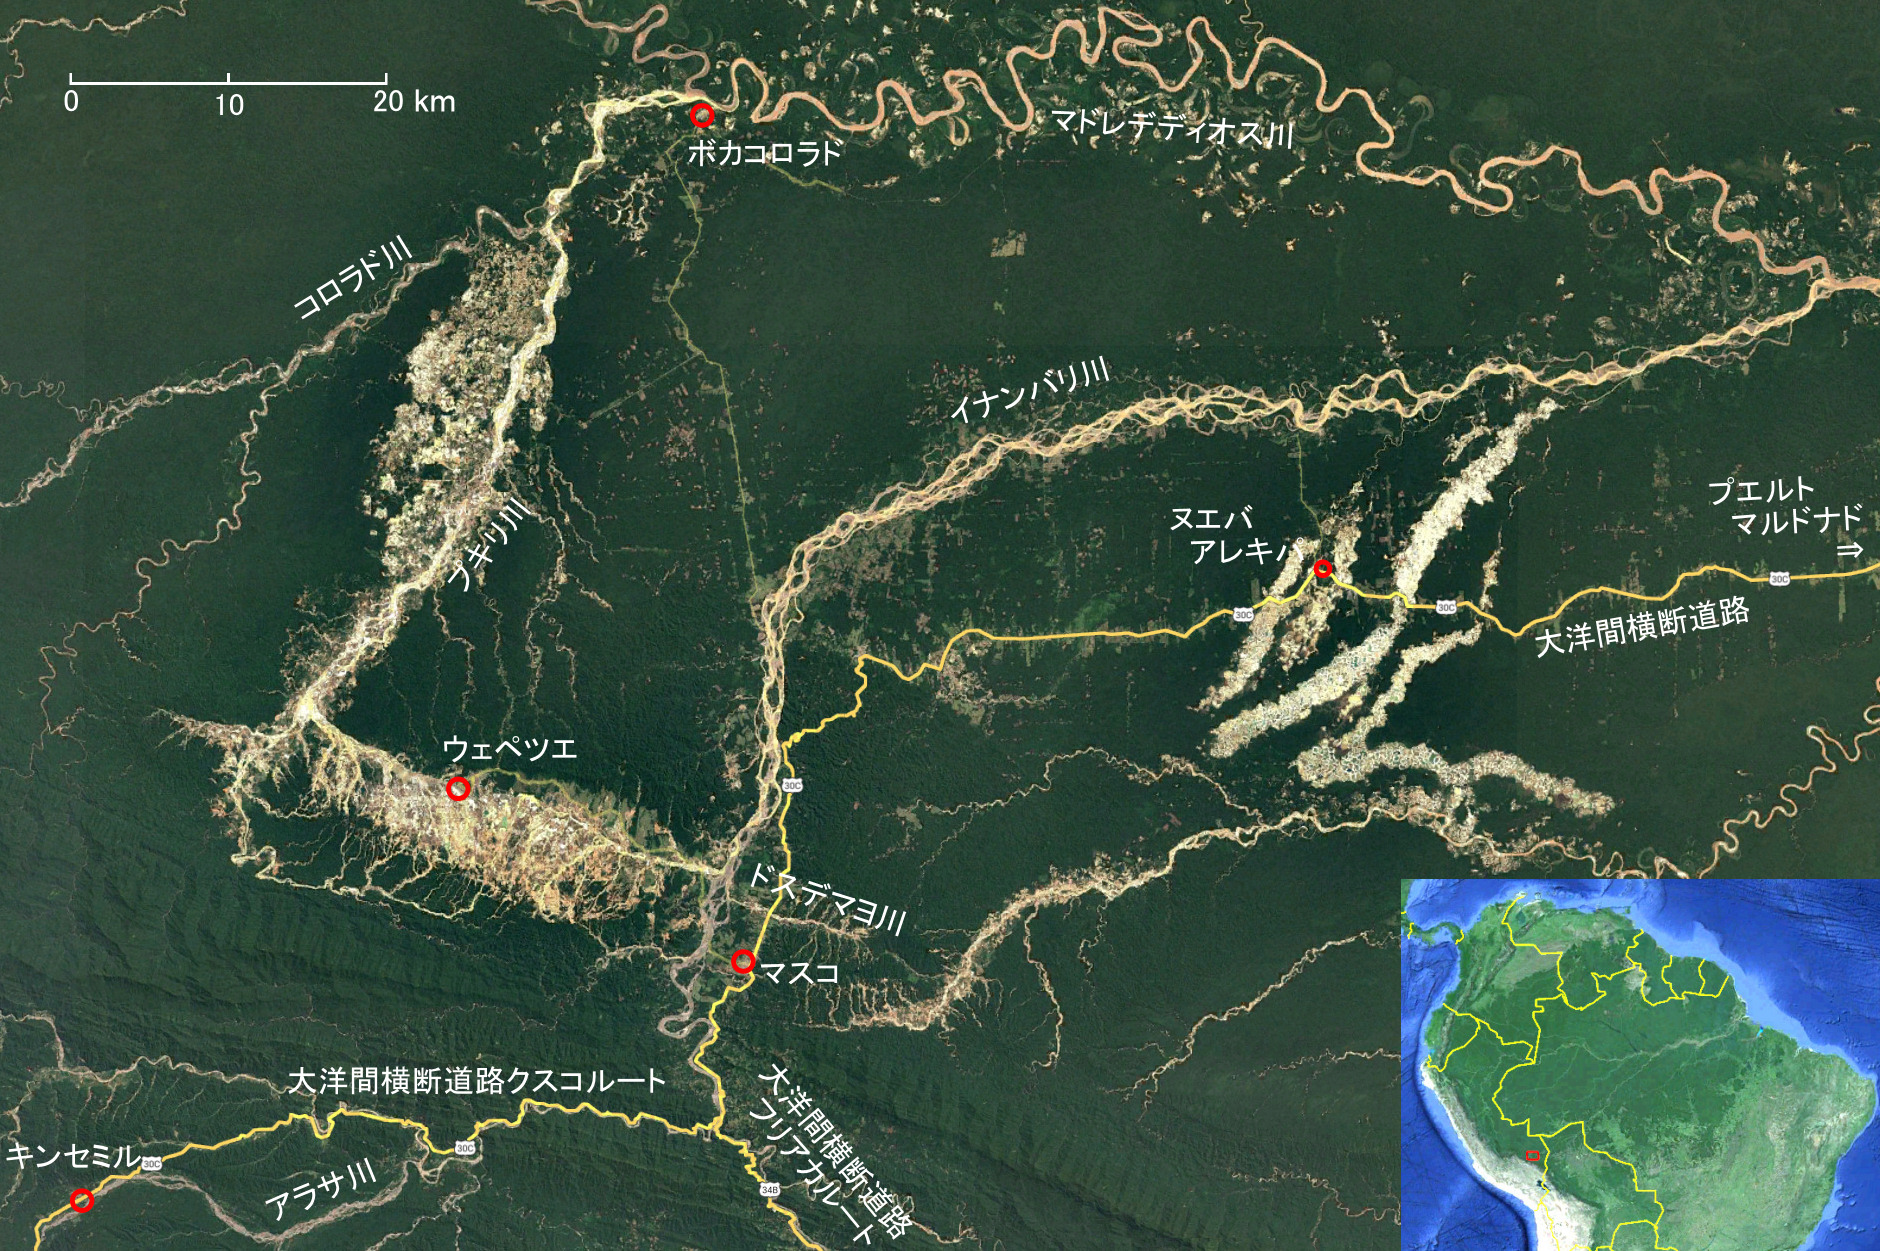 Placer gold collecting sites along the Interoceanic Highway